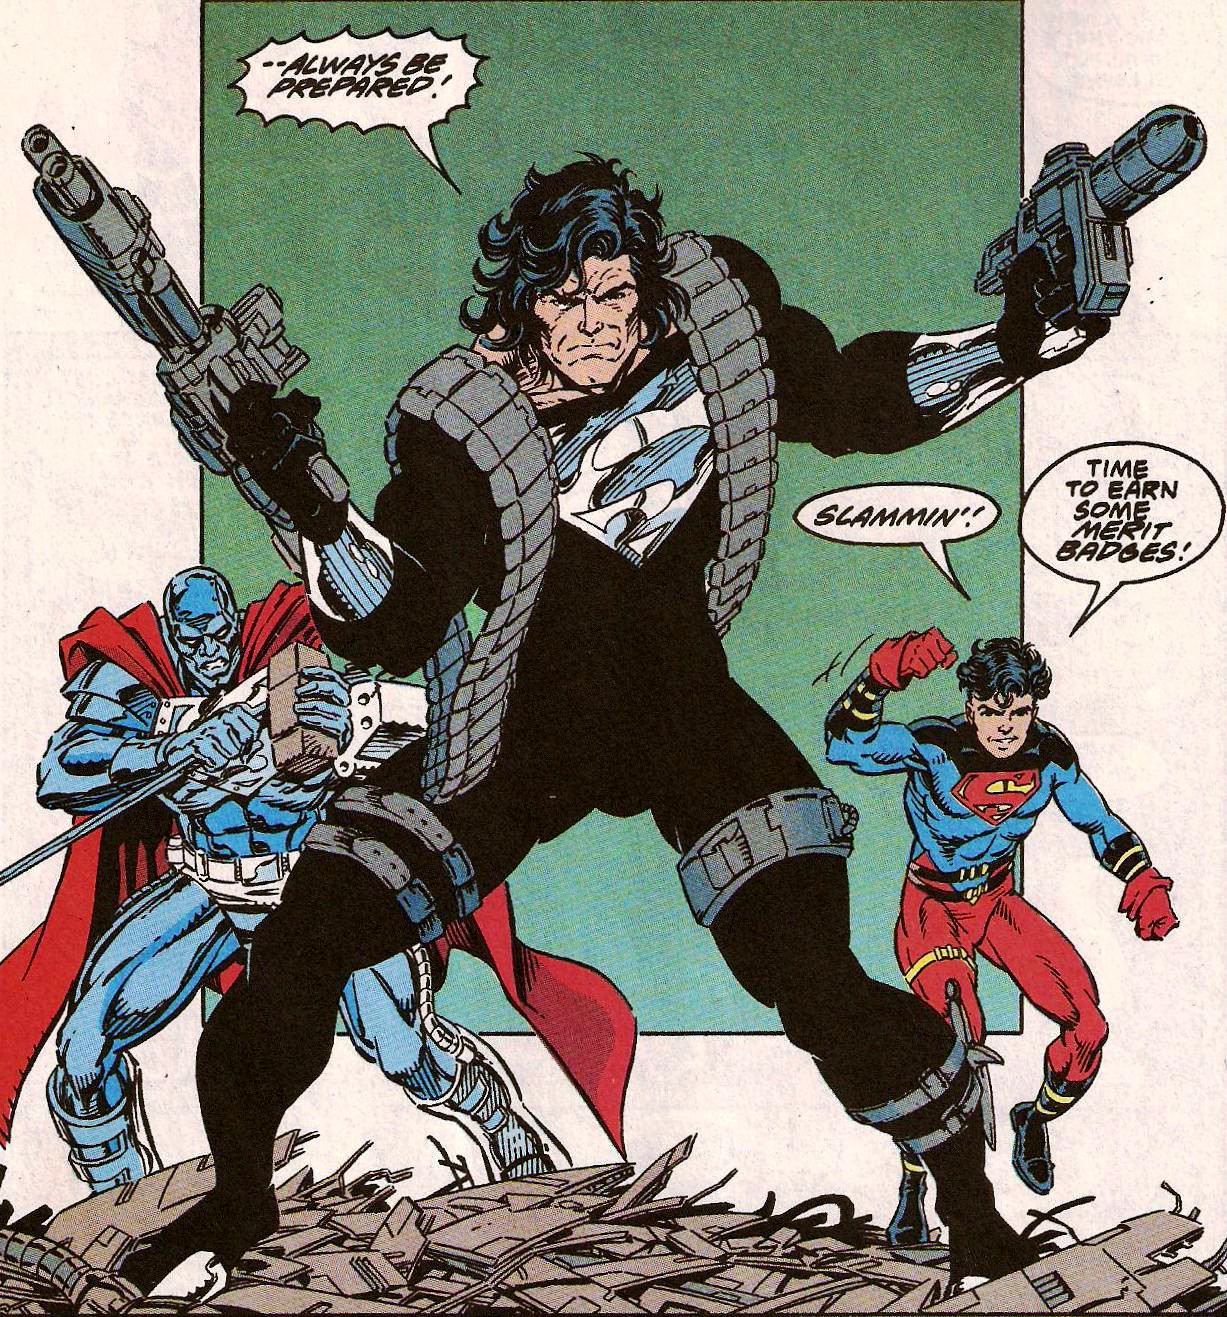 From Adventures of Superman #504 (1993)